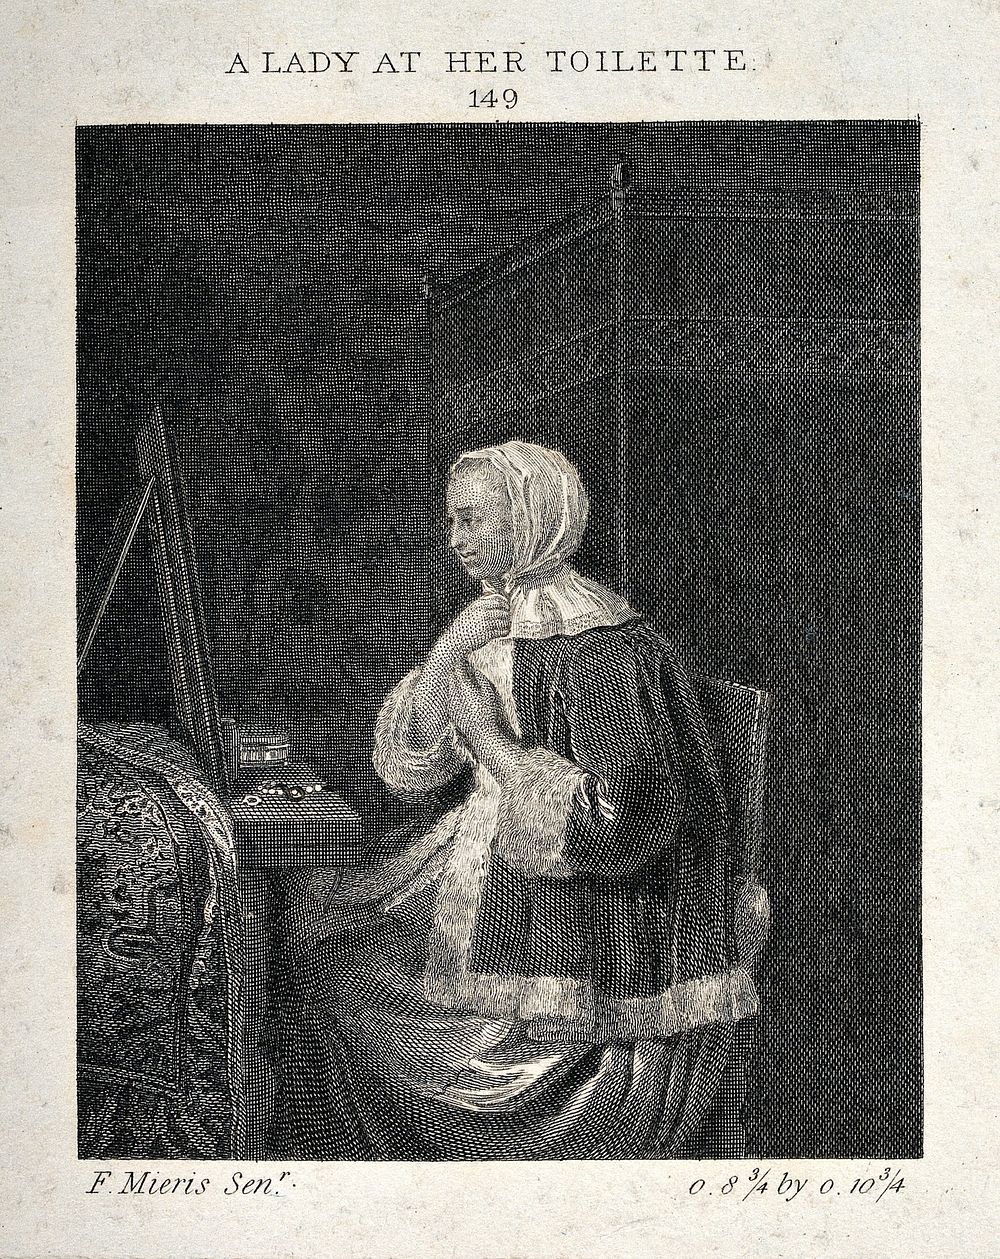 A woman at her toilet. Engraving after F. Mieris.